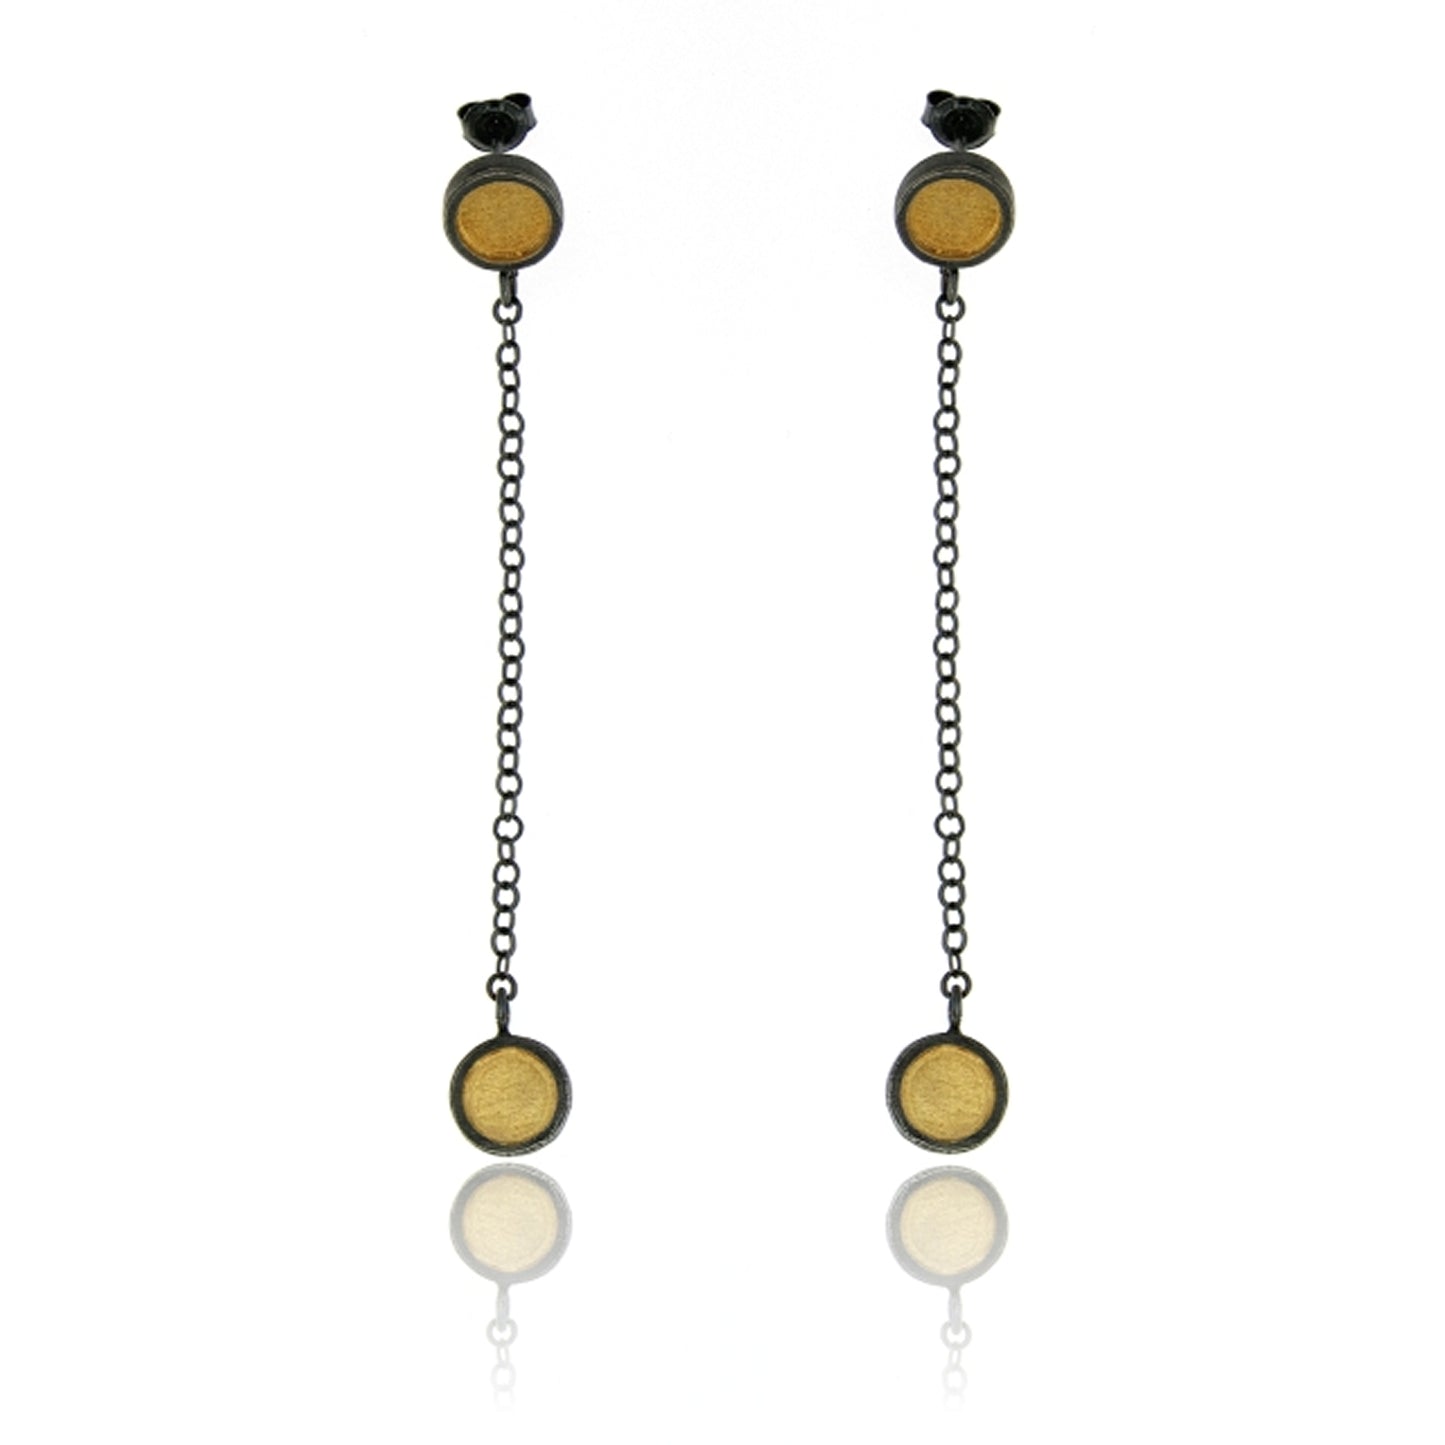 Mysterium Collection "Dots on a Chain" Earrings